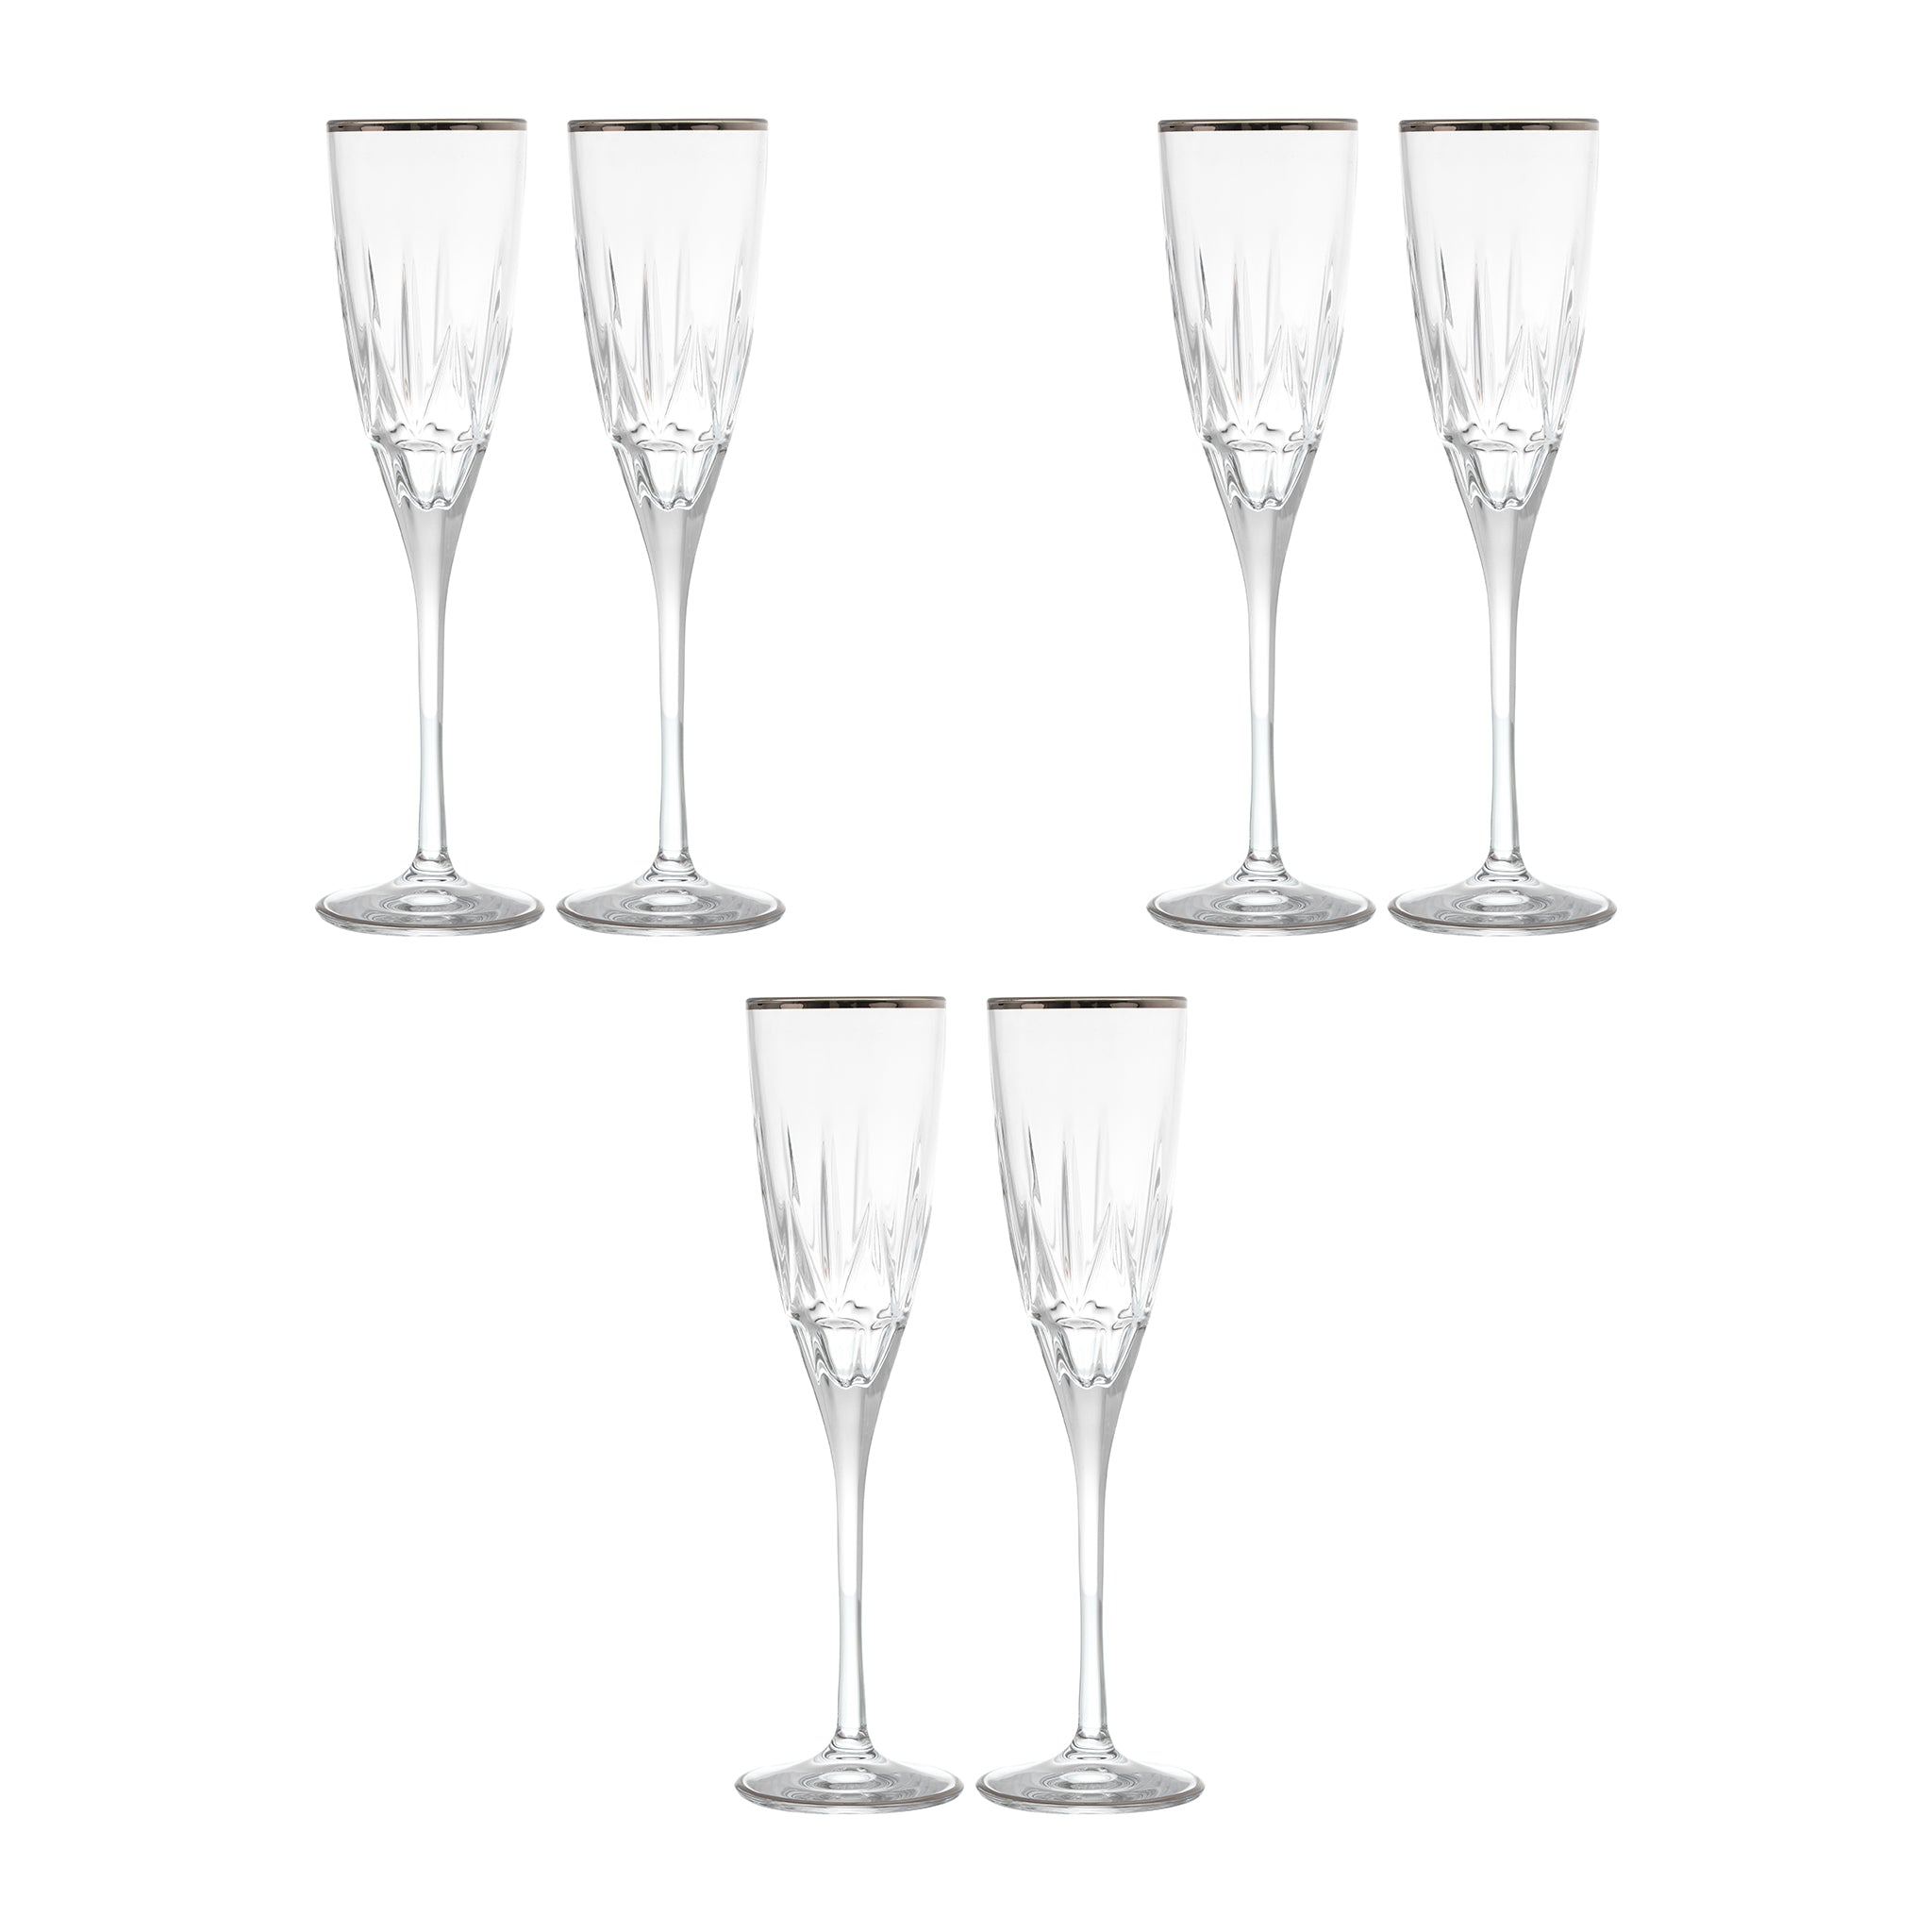 RCR Italy - Flute Glass Set 6 Pieces - Silver - 210ml - 380003125